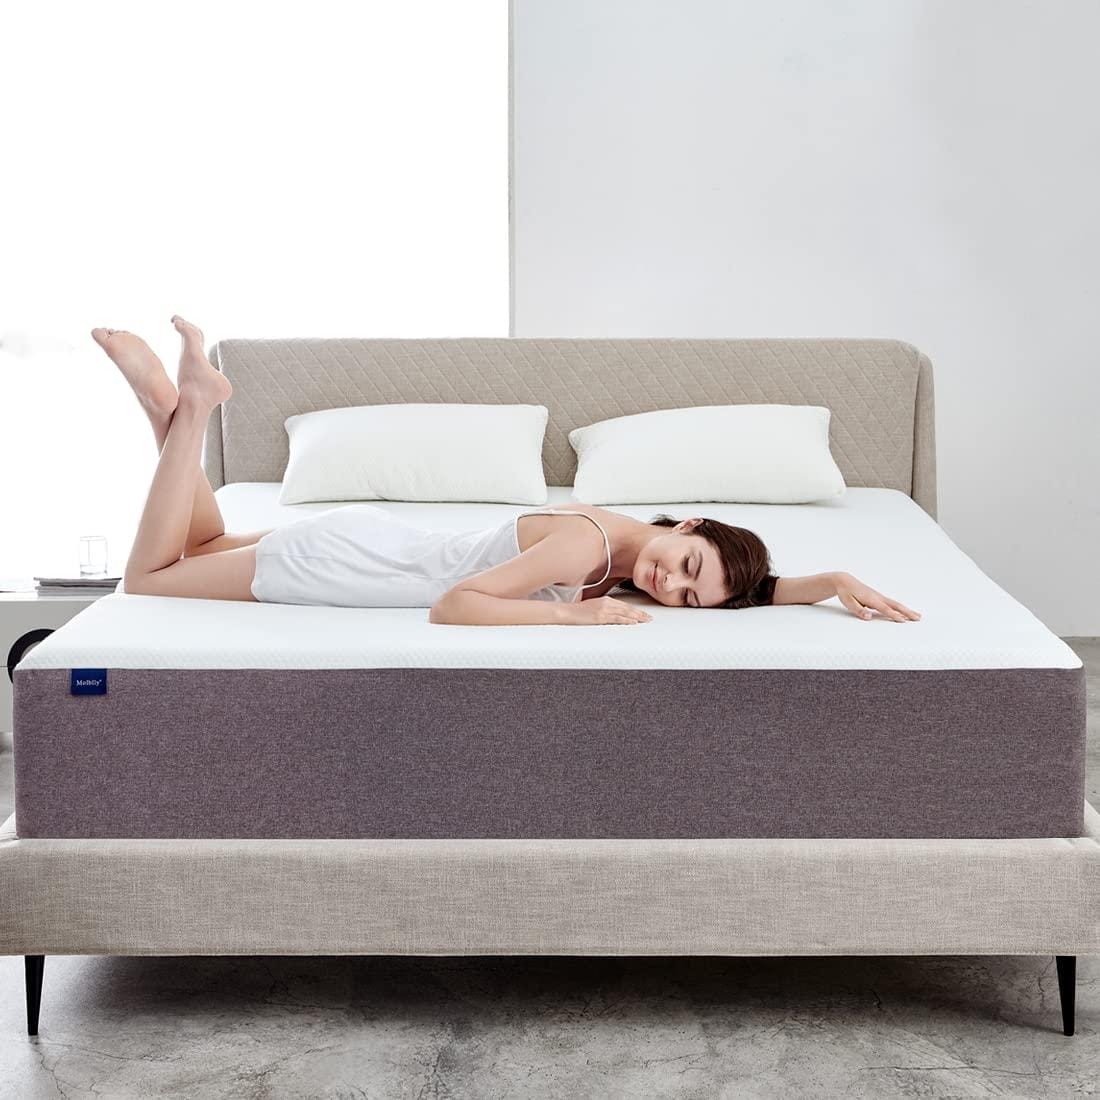 97 - 10 Best Mattresses for Osteoporosis in 2023